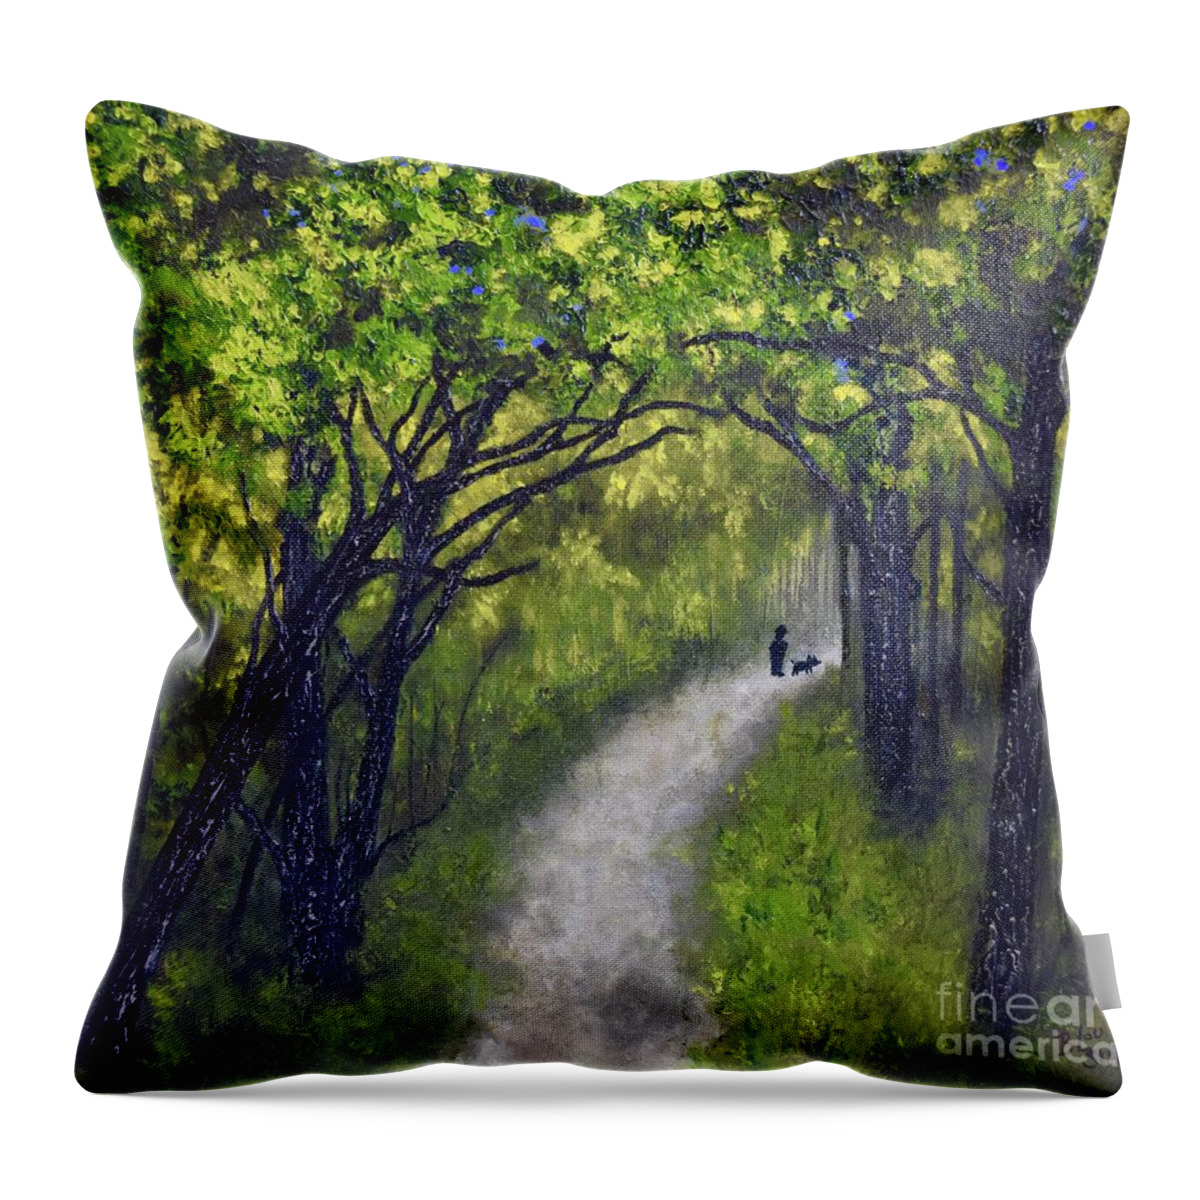 Barrieloustark Throw Pillow featuring the painting Stay the Path by Barrie Stark